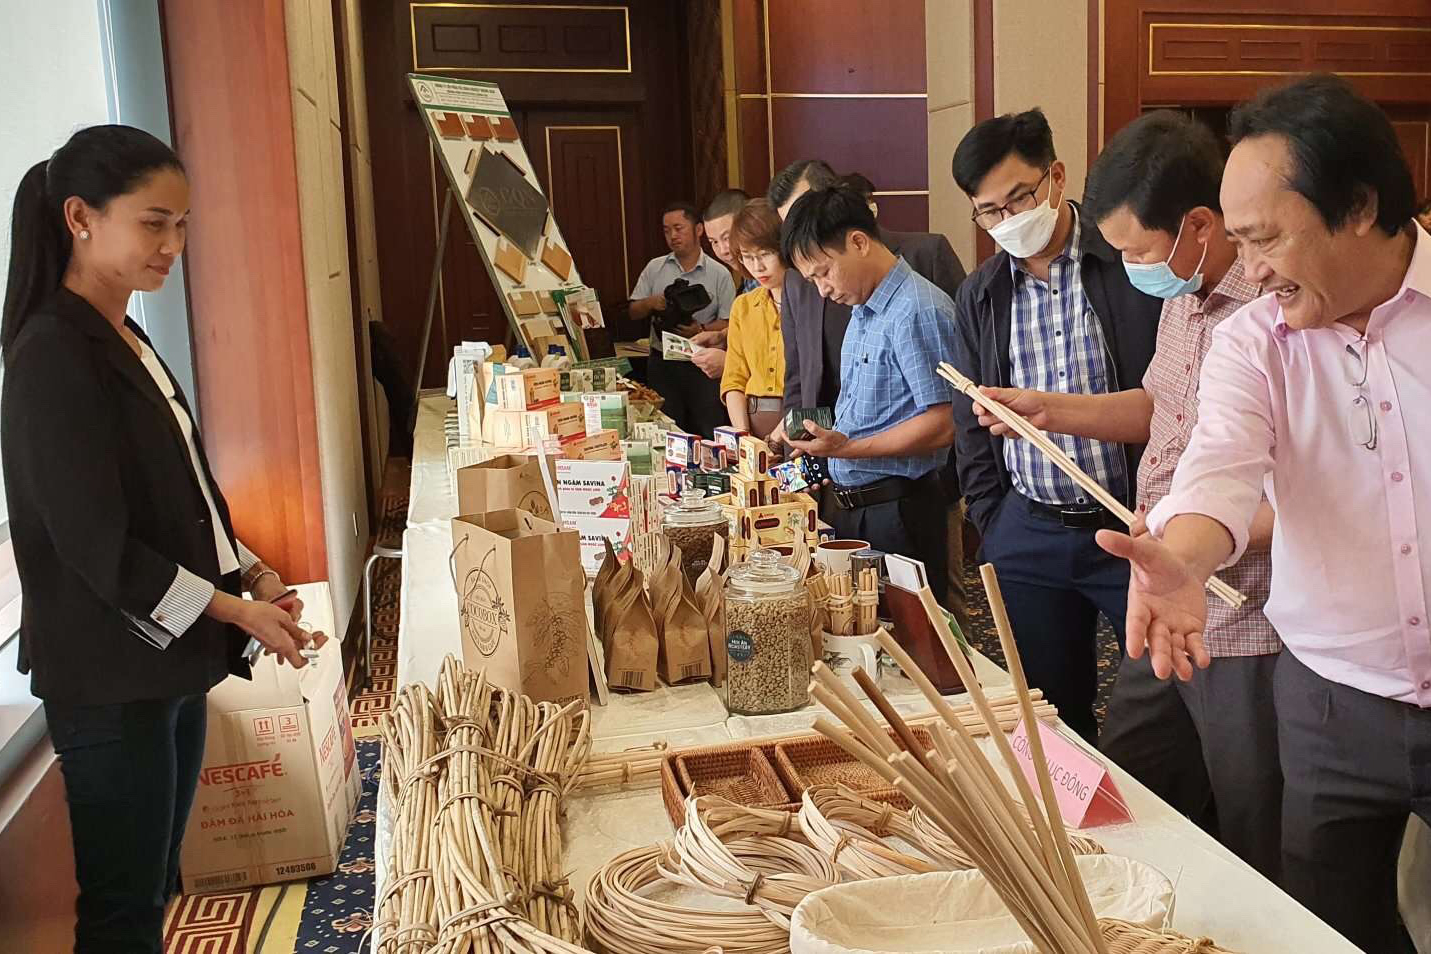 The forum to share experiences in developing agriculture and forestry in harmony with nature in the Central Truong Son region is organized by WWF and the Ministry of Agriculture and Rural Development.